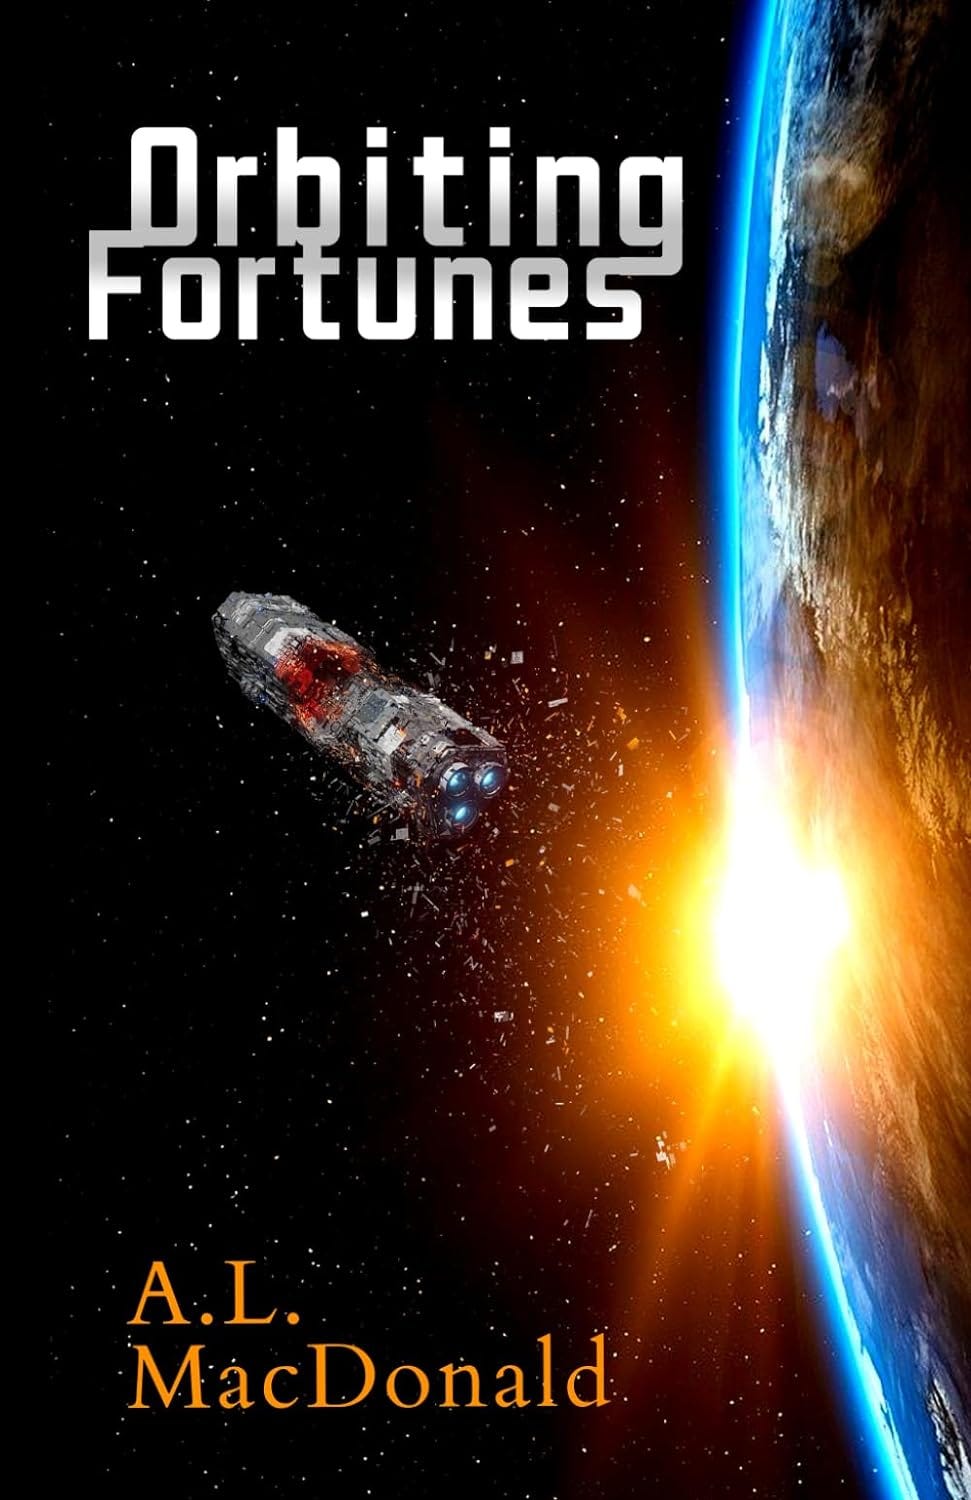 Orbiting futures cover. A space ship takes off from a planet.